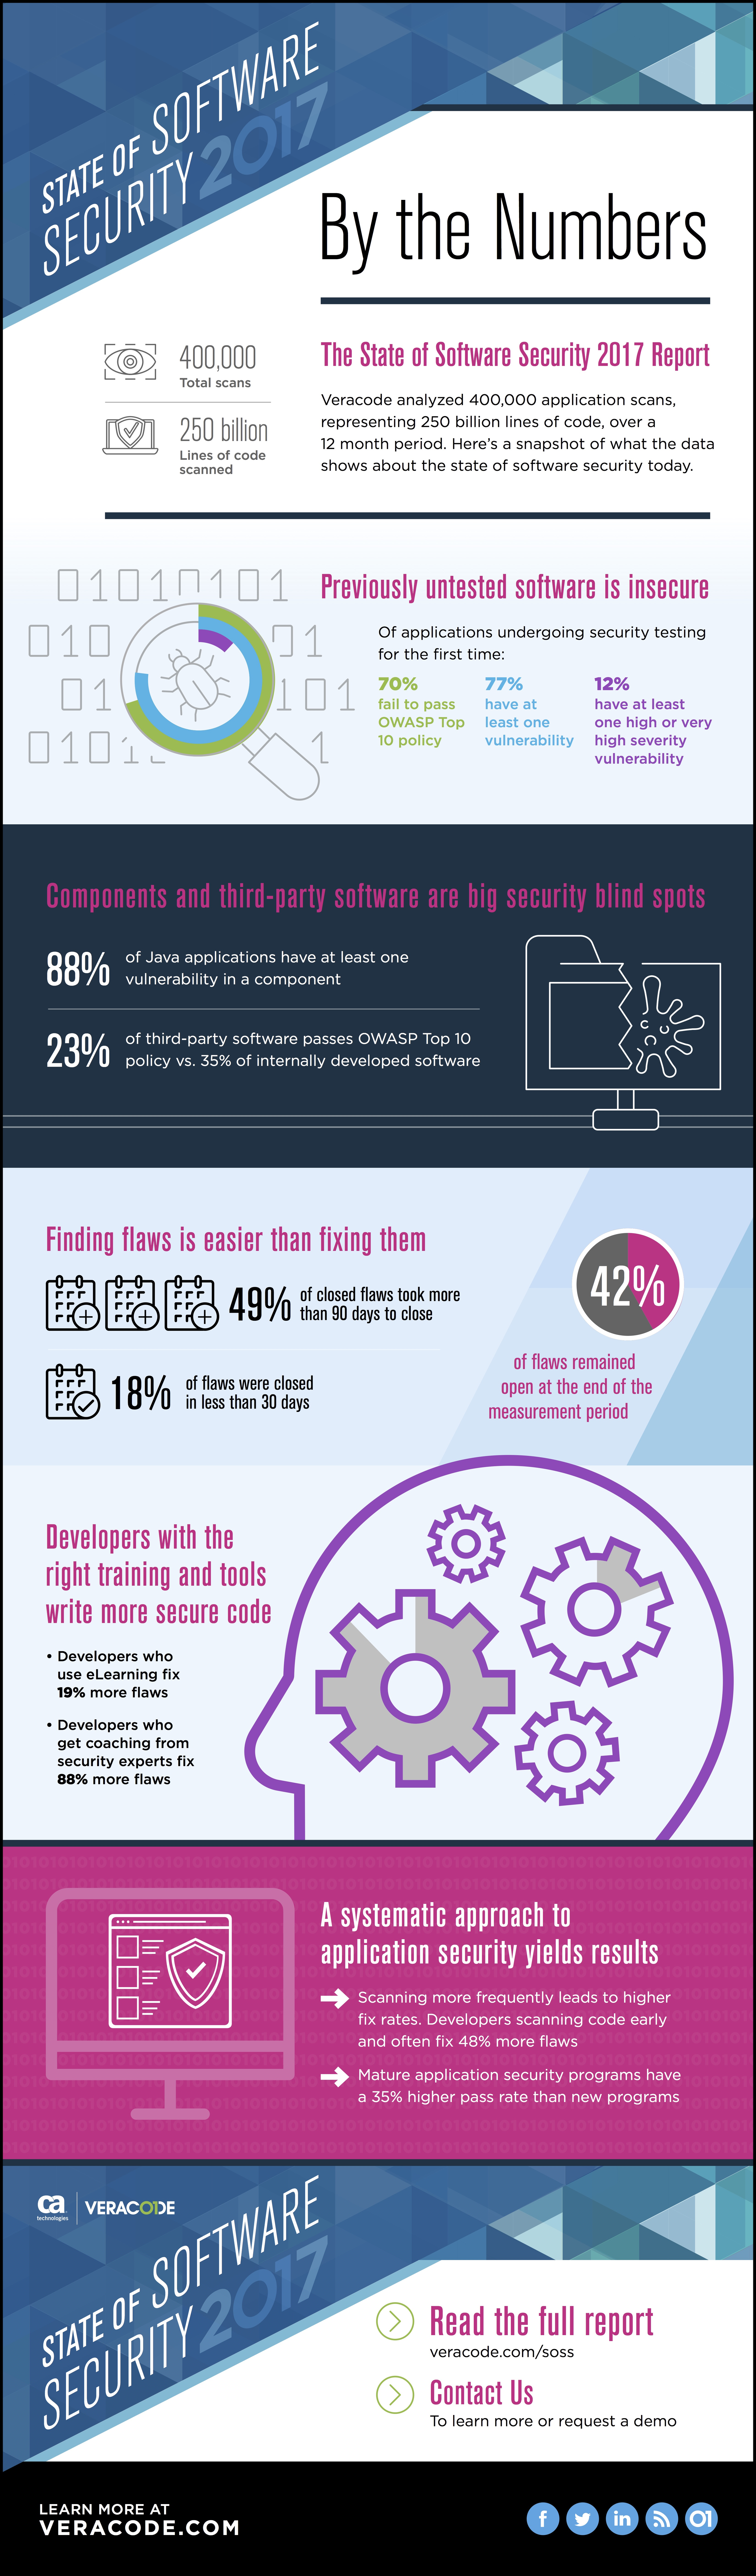 infographic-state-of-software-security-2017